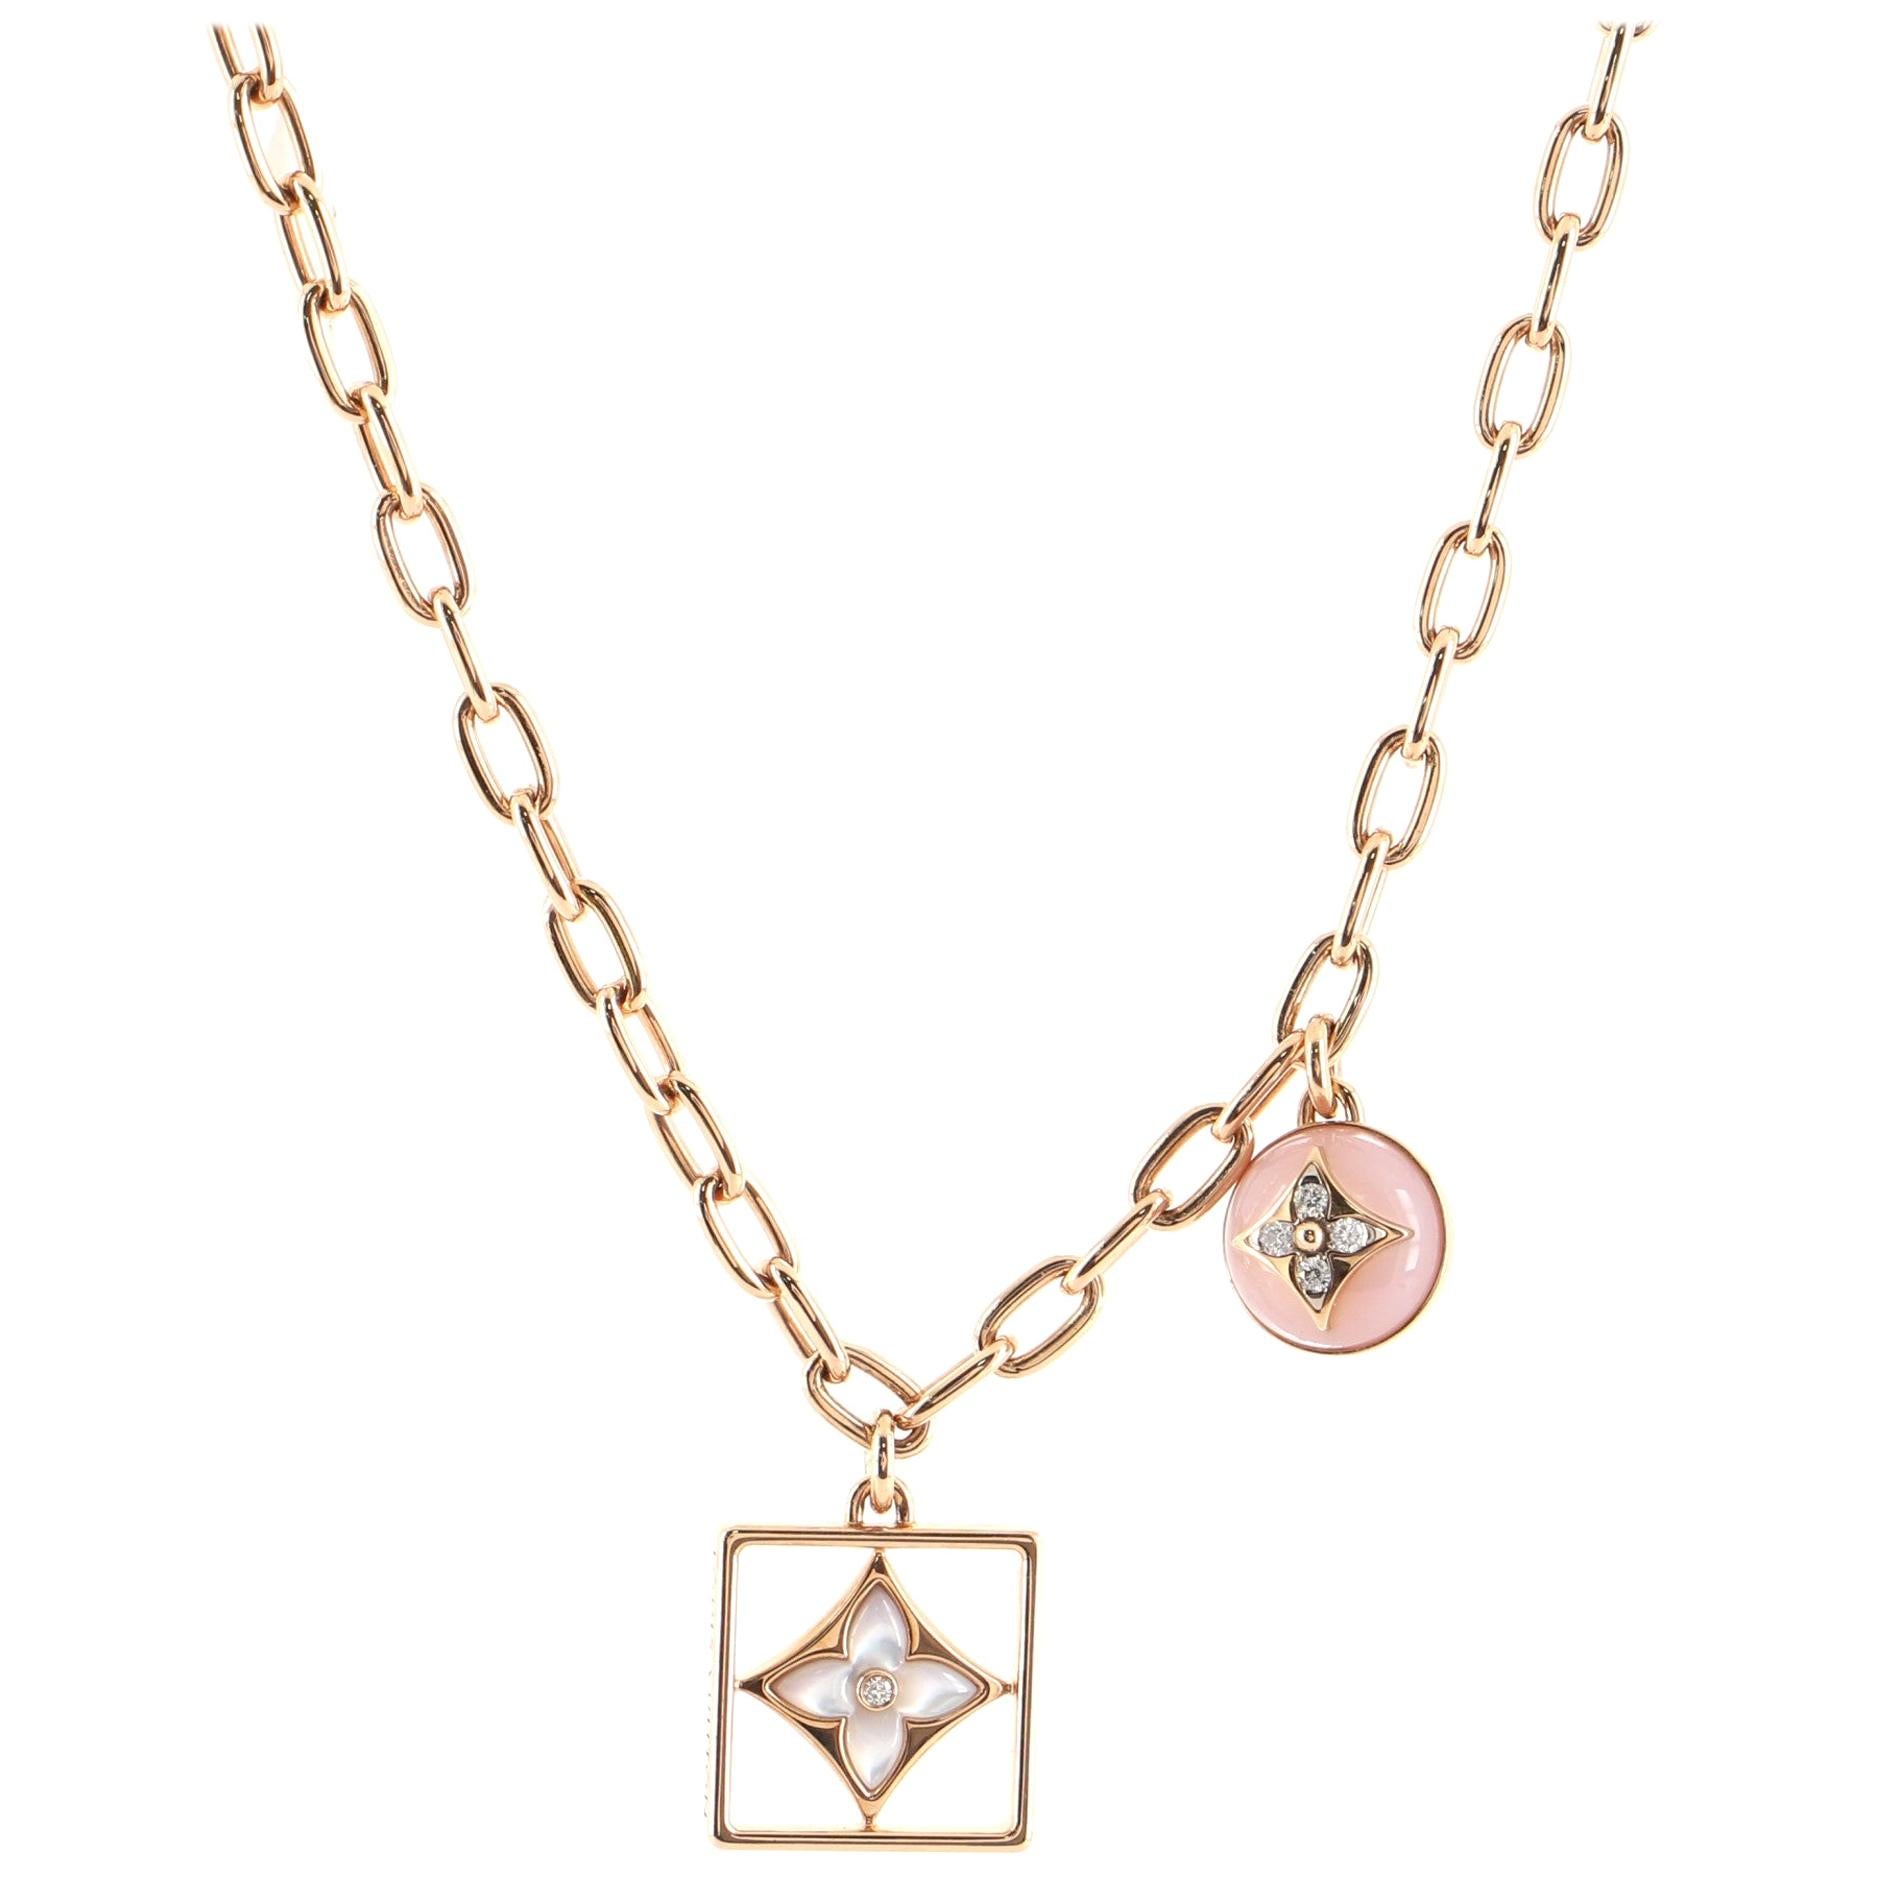 Louis Vuitton B Blossom Necklace 18K Rose Gold with 18K White Gold